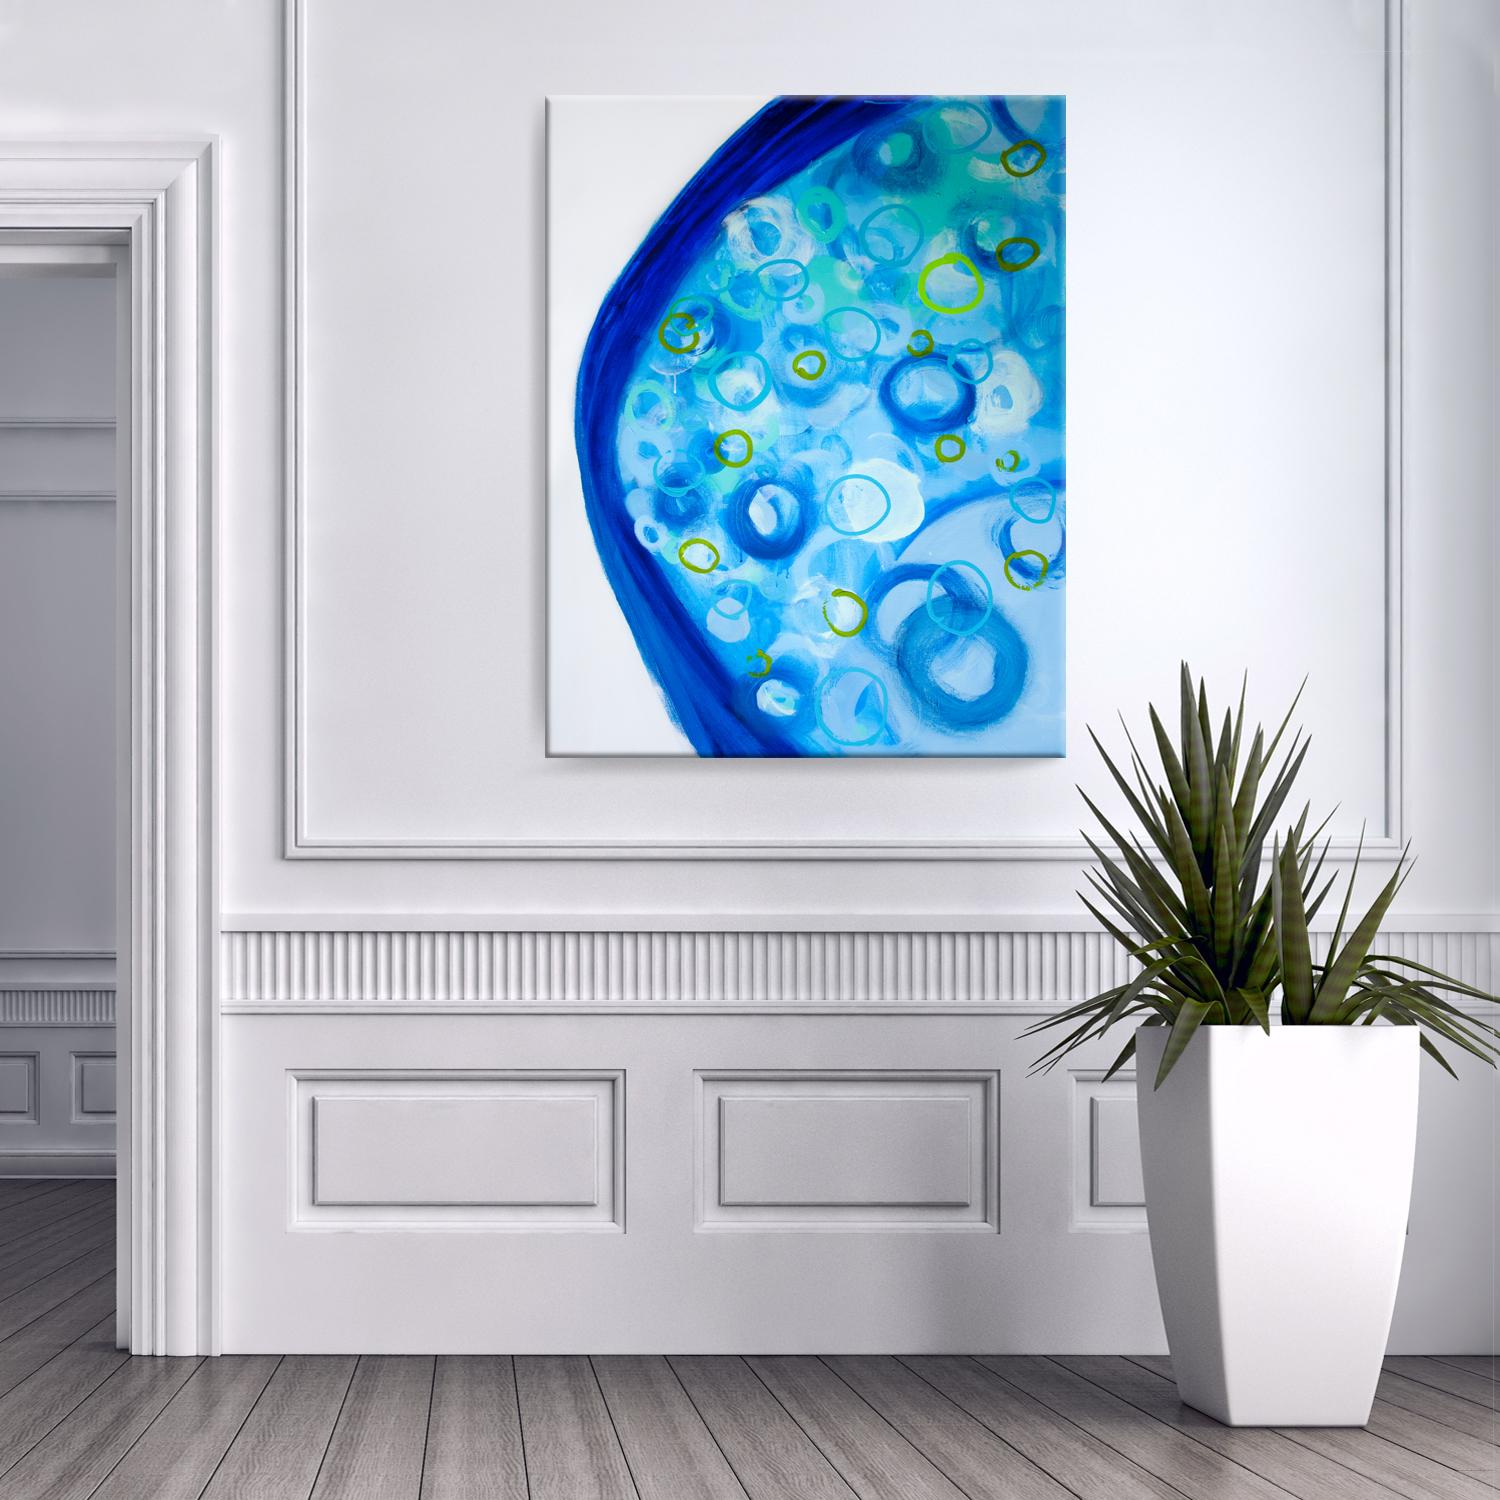 'Caught Up in the Rhythm' Wrapped Canvas Original Painting features a whimsical abstract aesthetic in vivid hues of blue, green, and white. Inspired by her travels and belief of speaking through color, Samerra’s abstract work is a kaleidoscope of